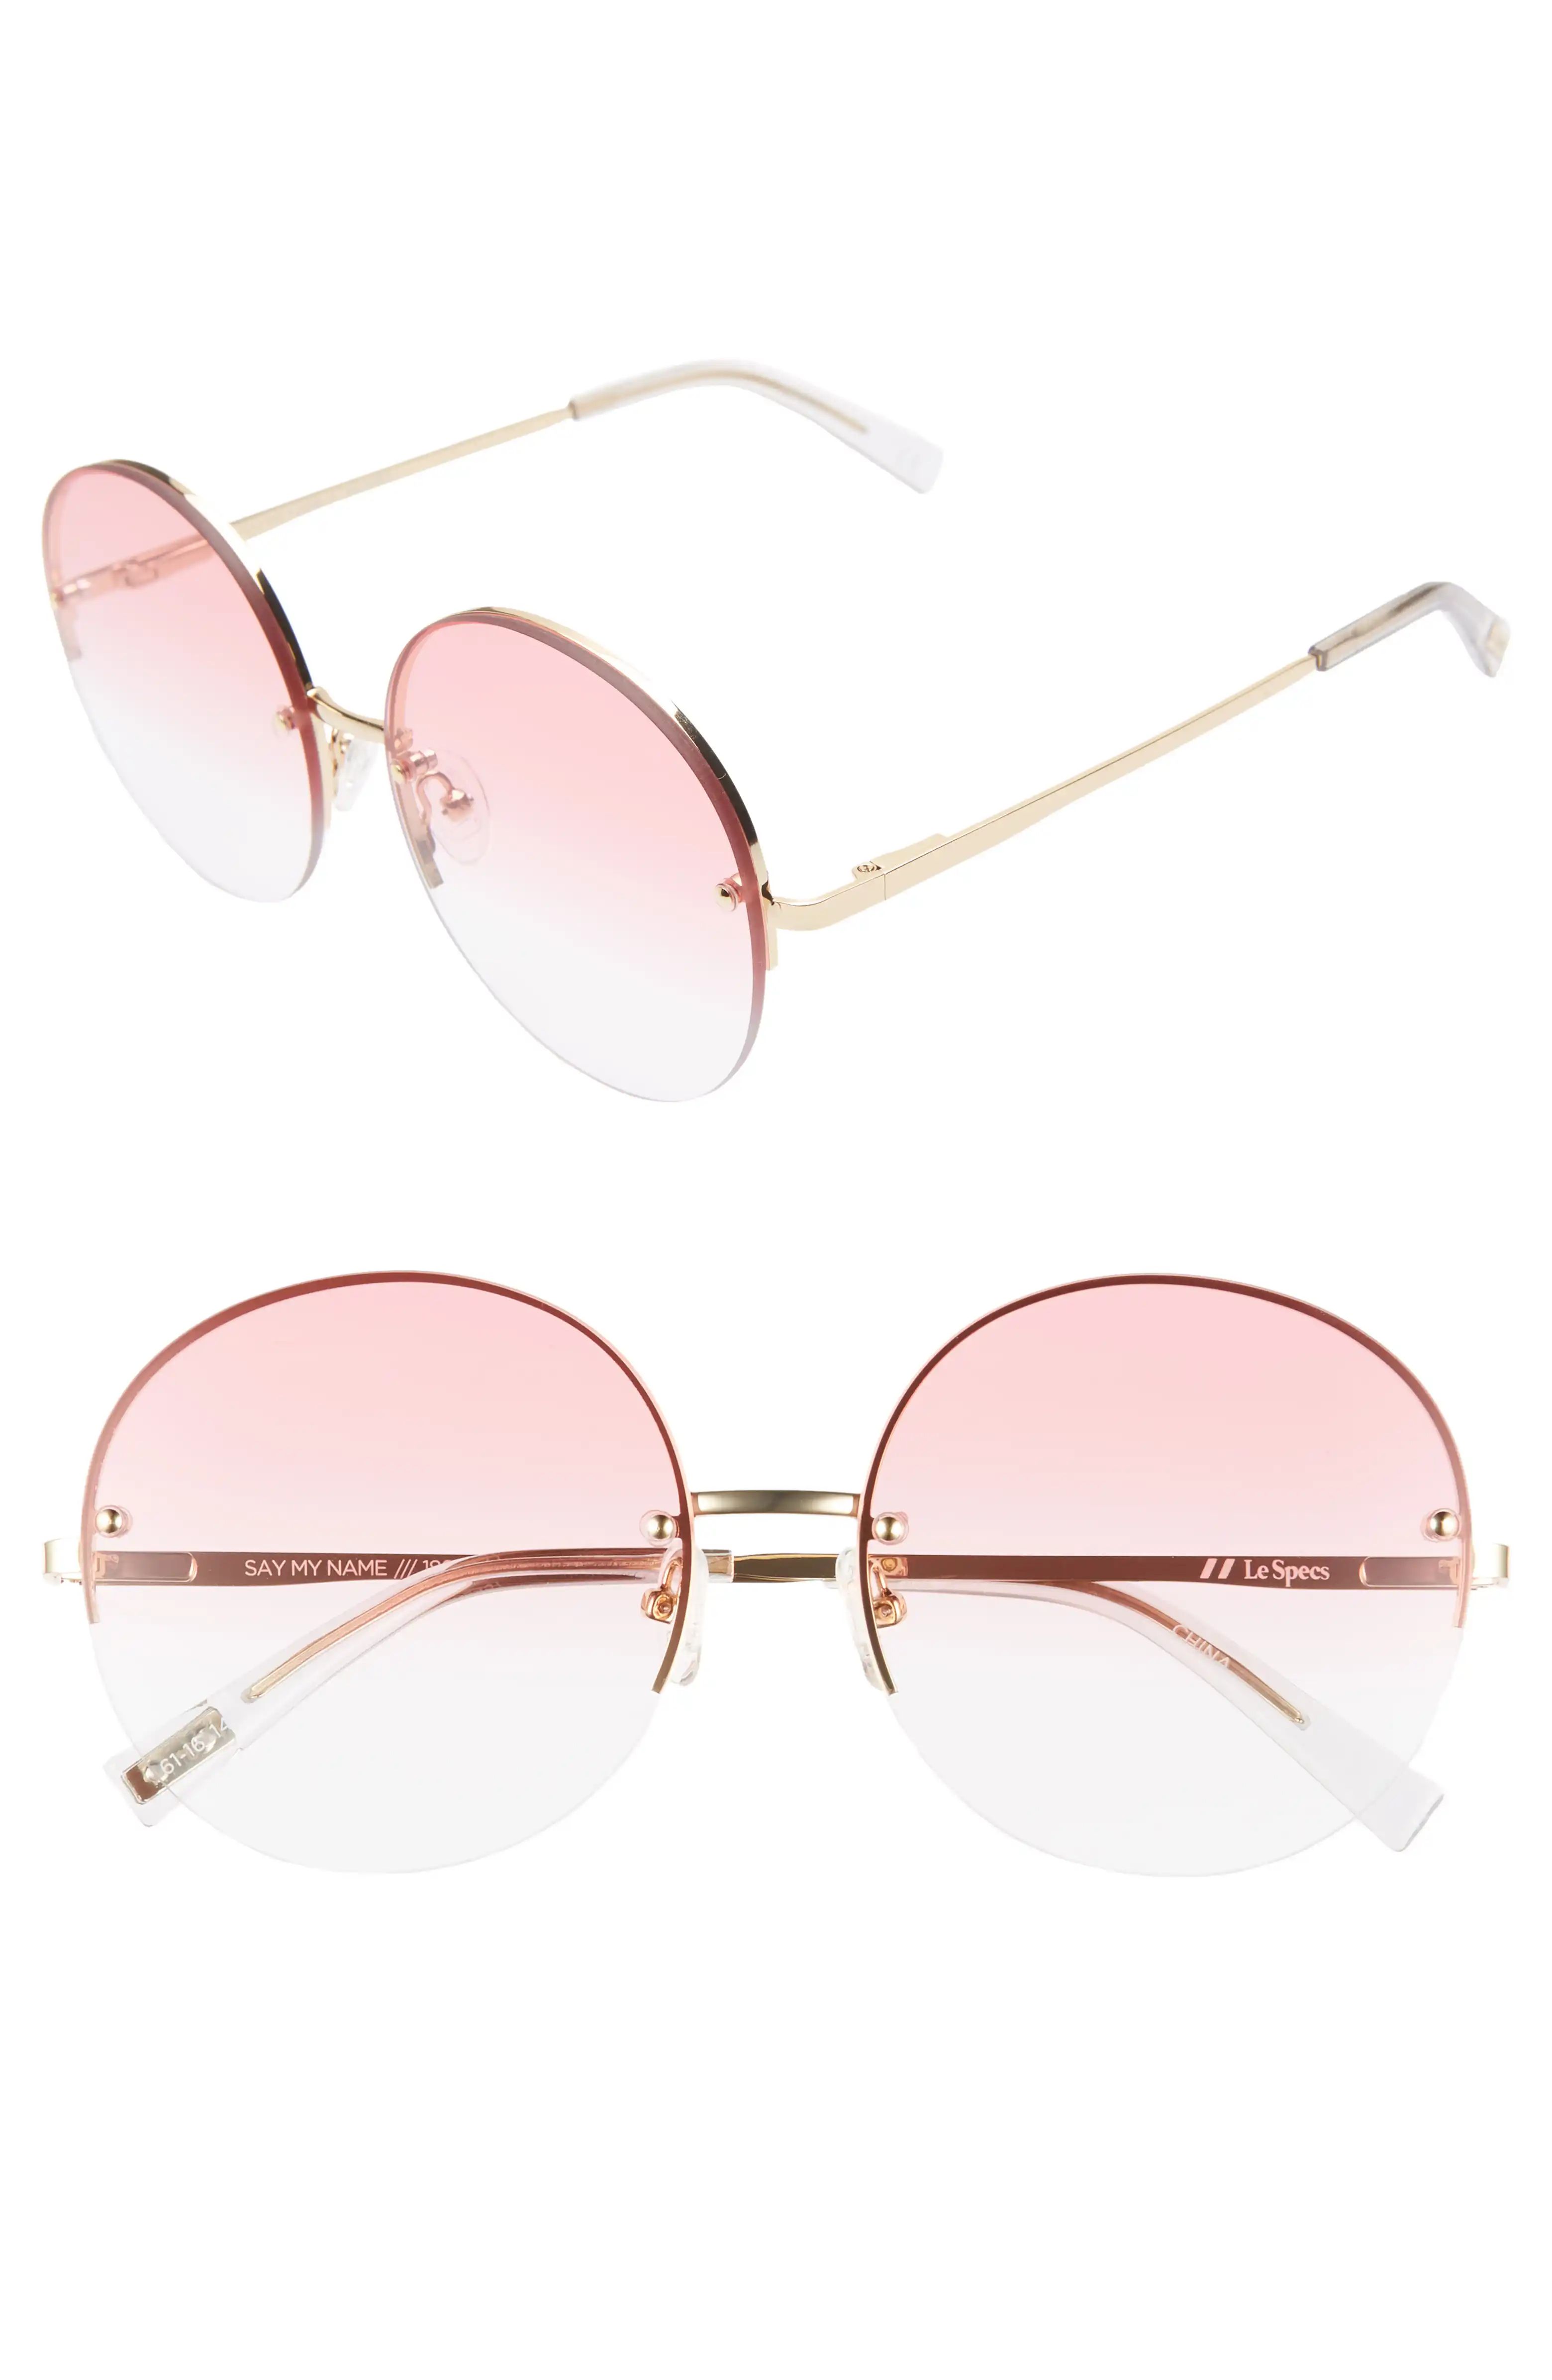 Say My Name 61mm Semi Rimless Round Sunglasses | Nordstrom